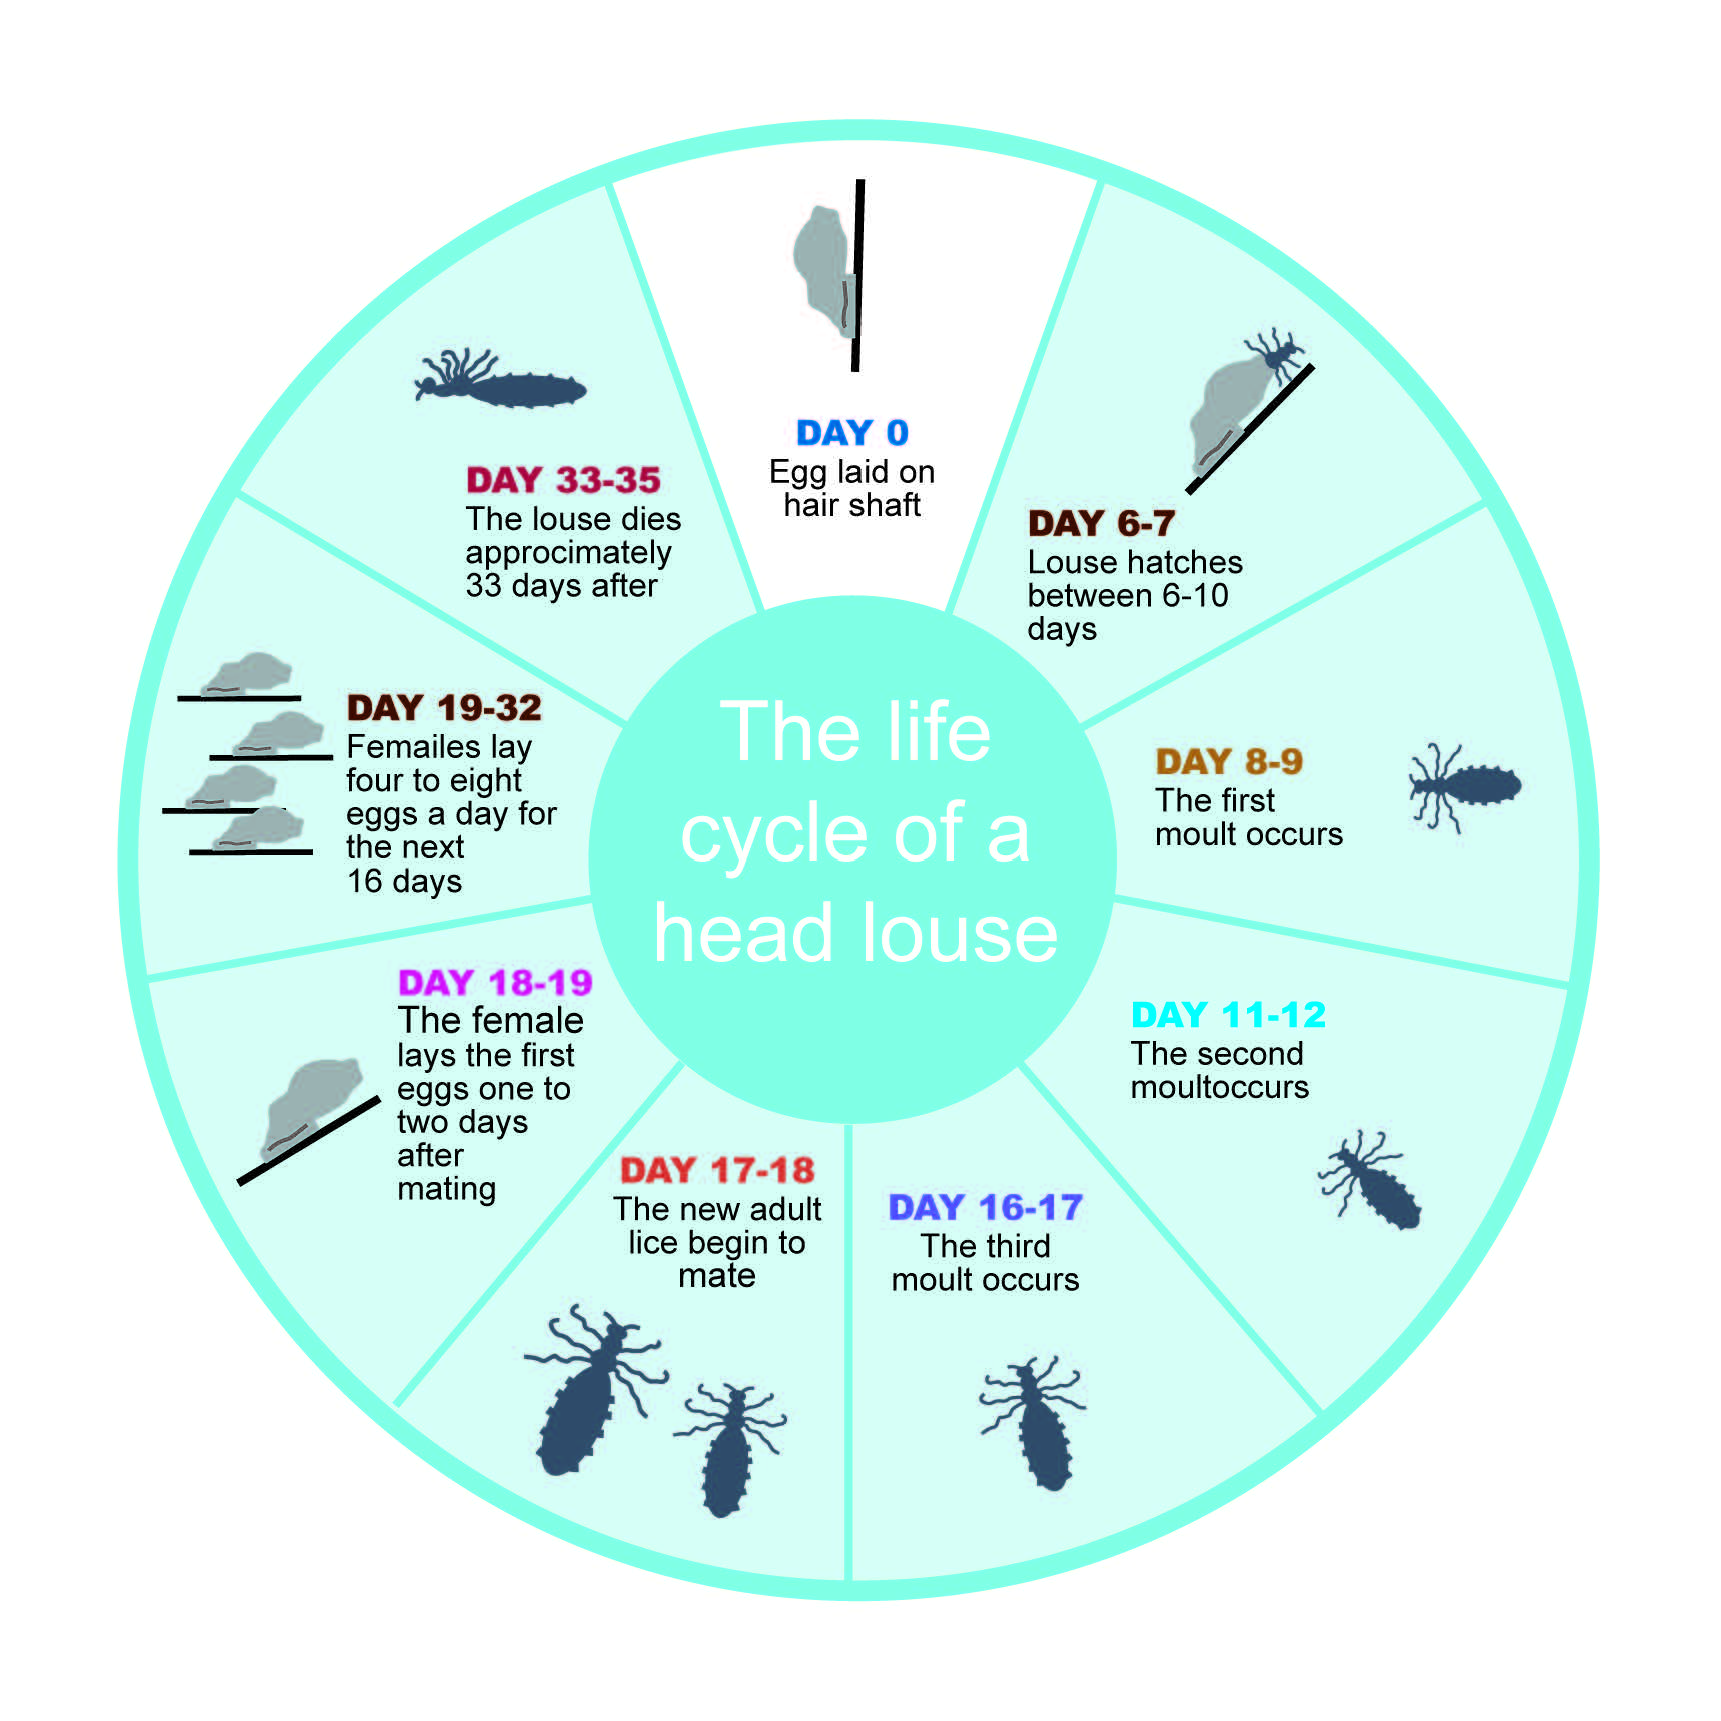 The life cycle of a head louse